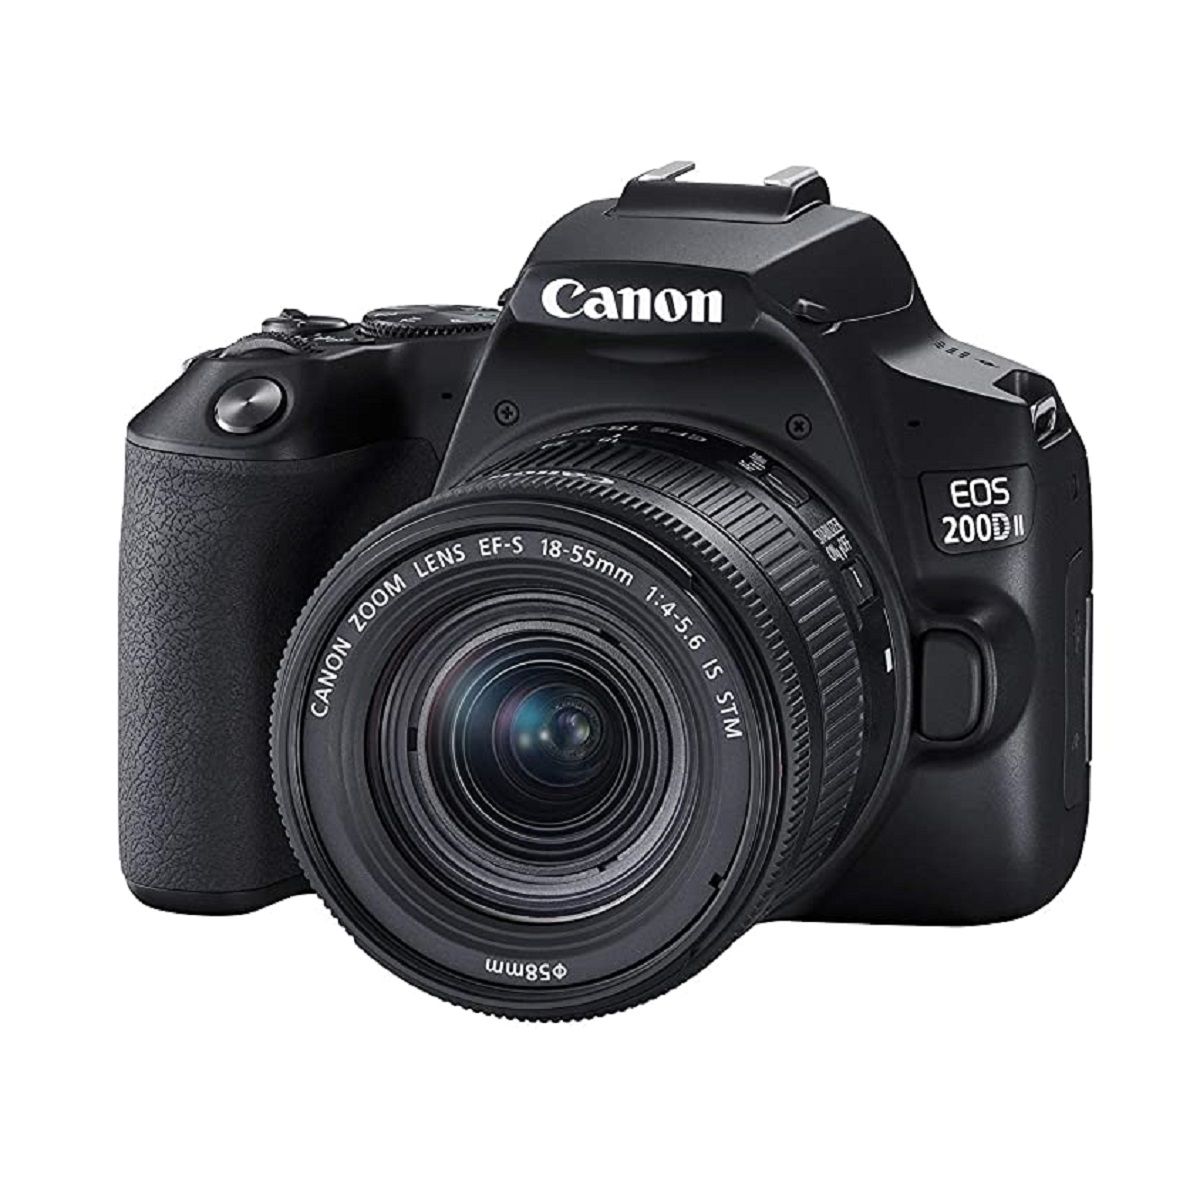 Canon EOS 200D Digital SLR Camera with 3" Vari-angle Touch Screen, Black